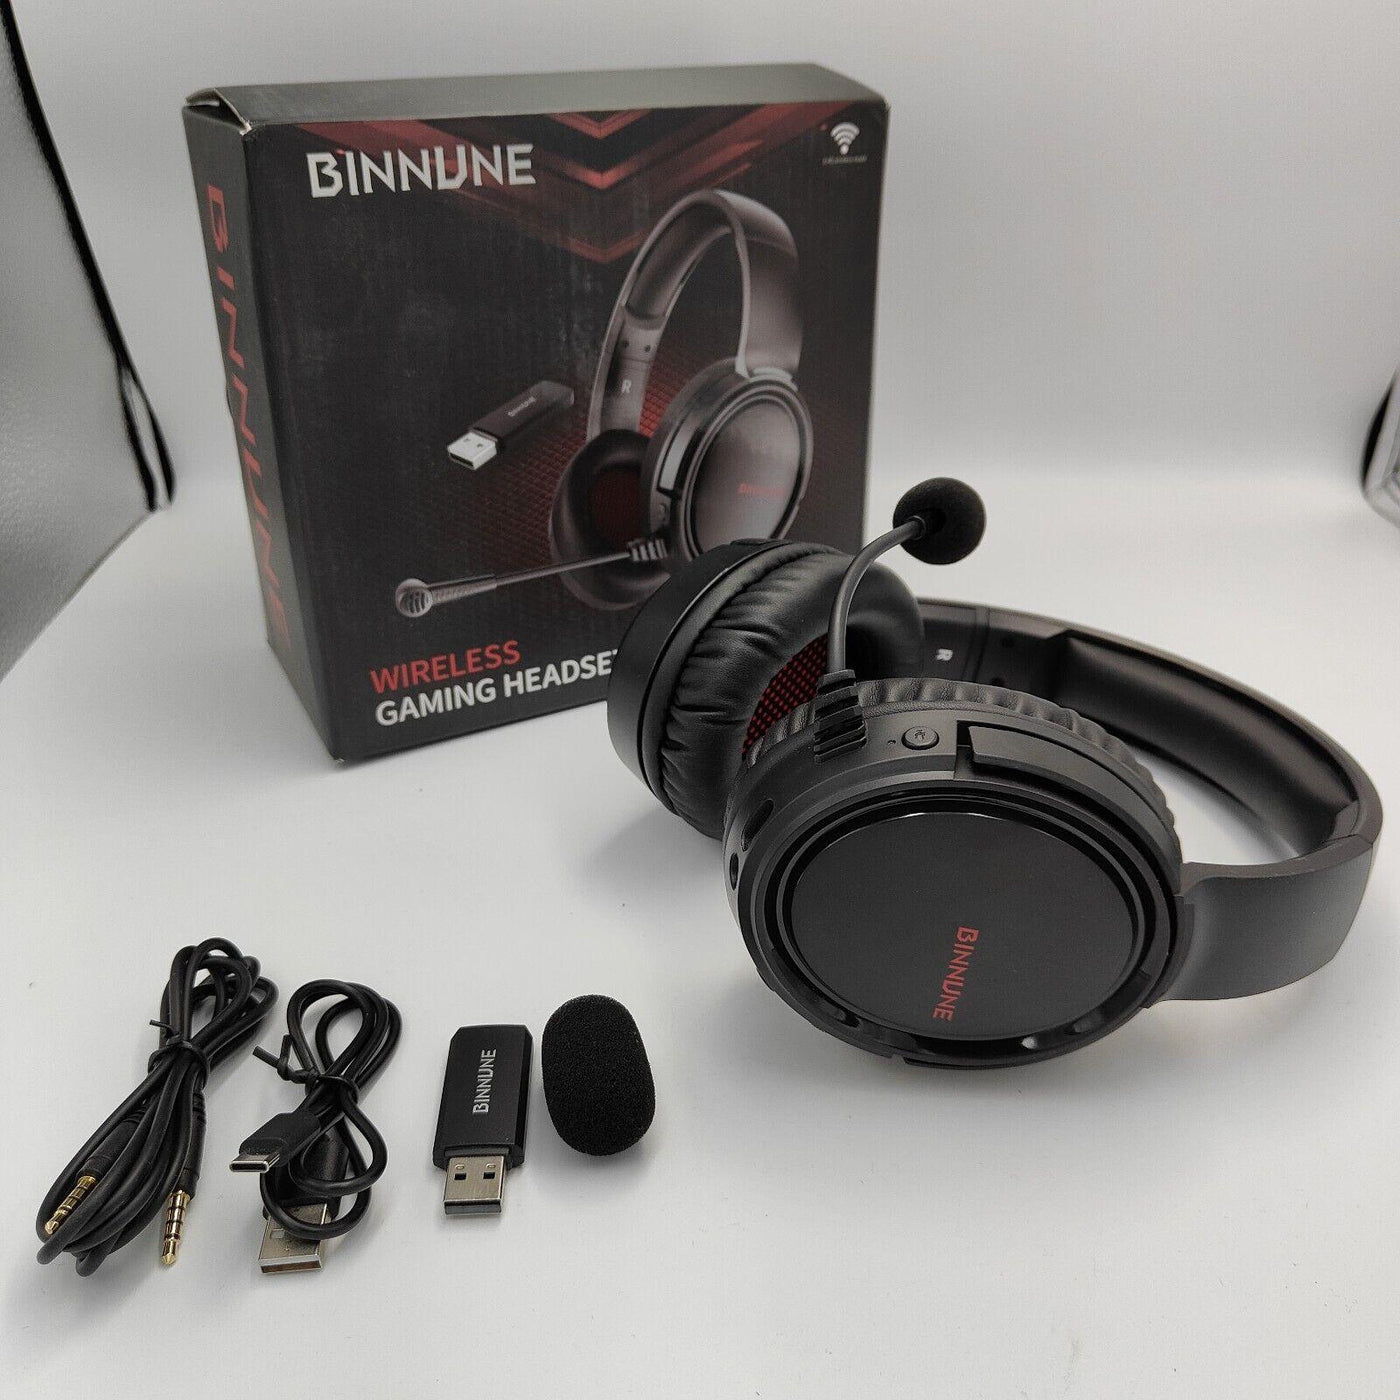 BINNUNE Wireless Gaming Headset with Mic for PC PS4 PS5 Used - Massive Discounts